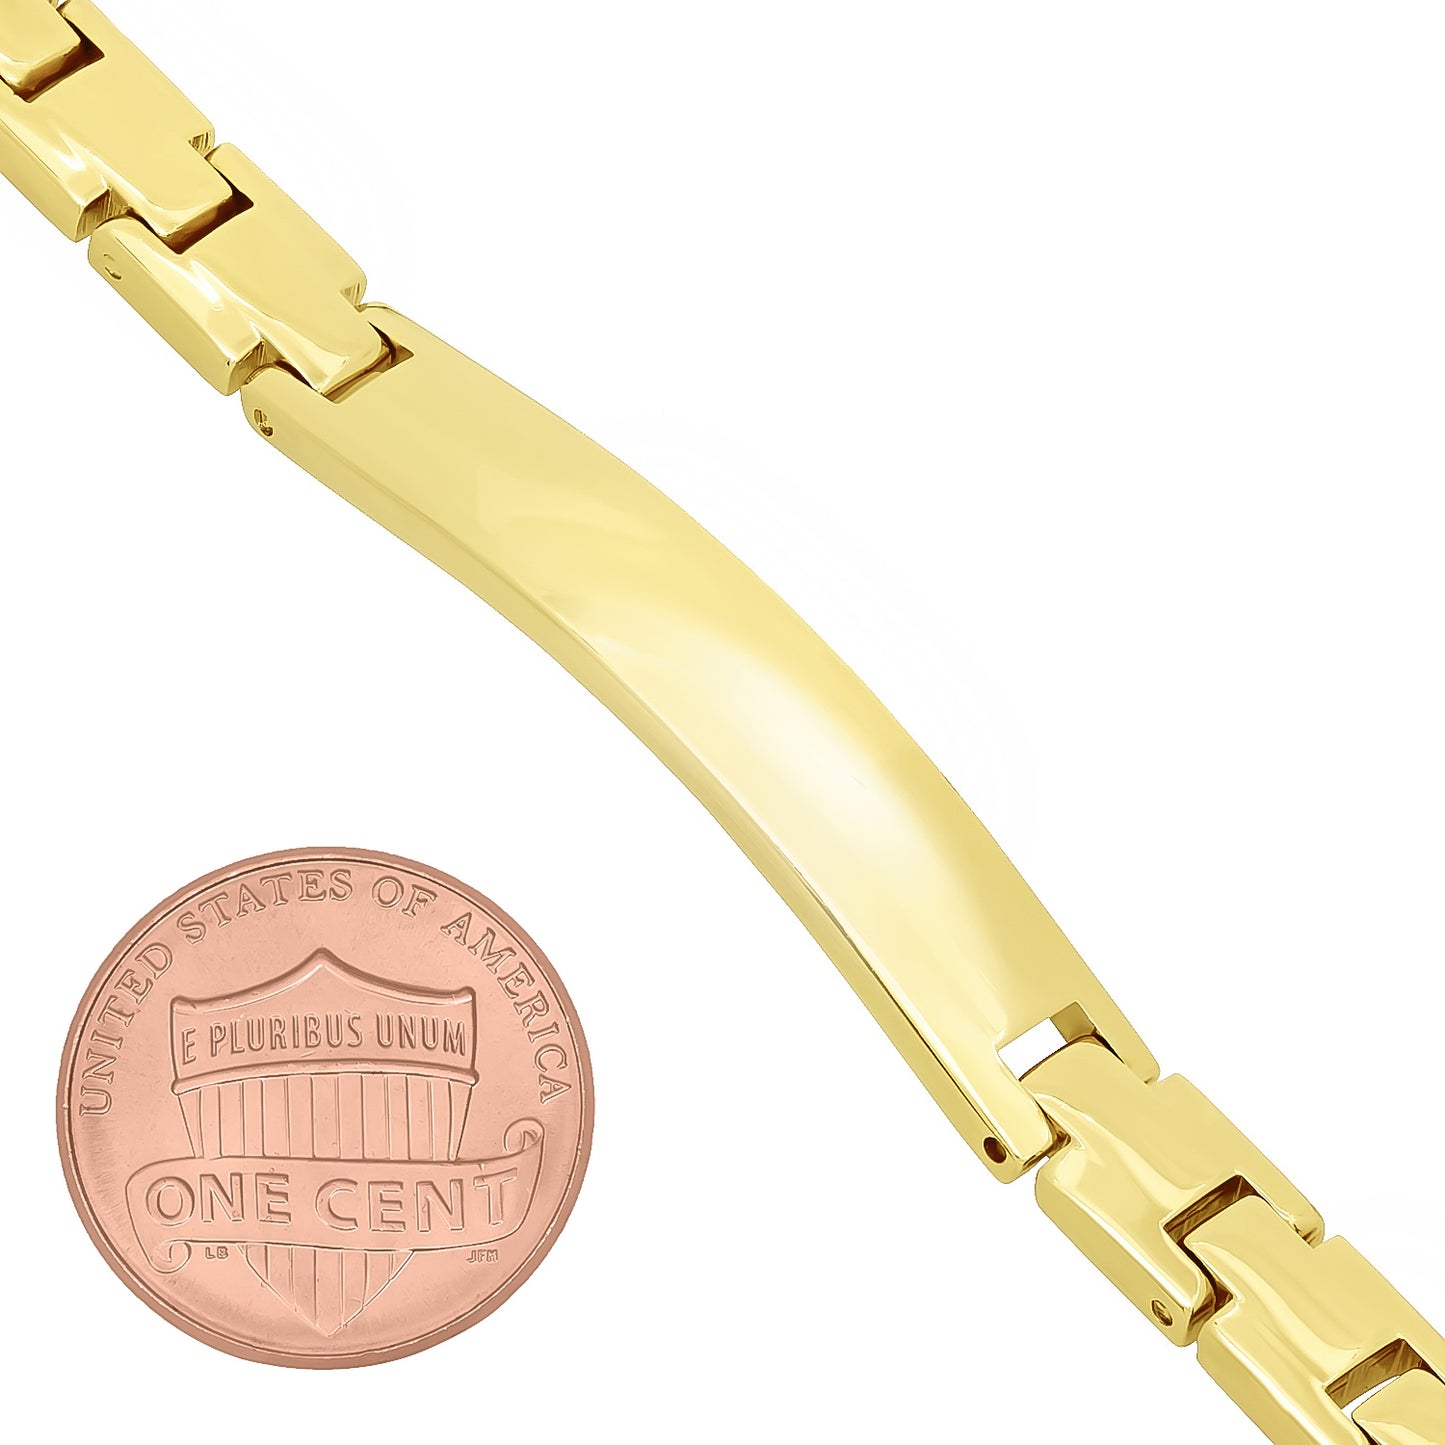 7mm Smooth 14k Yellow Gold Plated Engravable ID Solid Link Bracelet + Jewelry Polishing Cloth (SKU: GL-ID7)